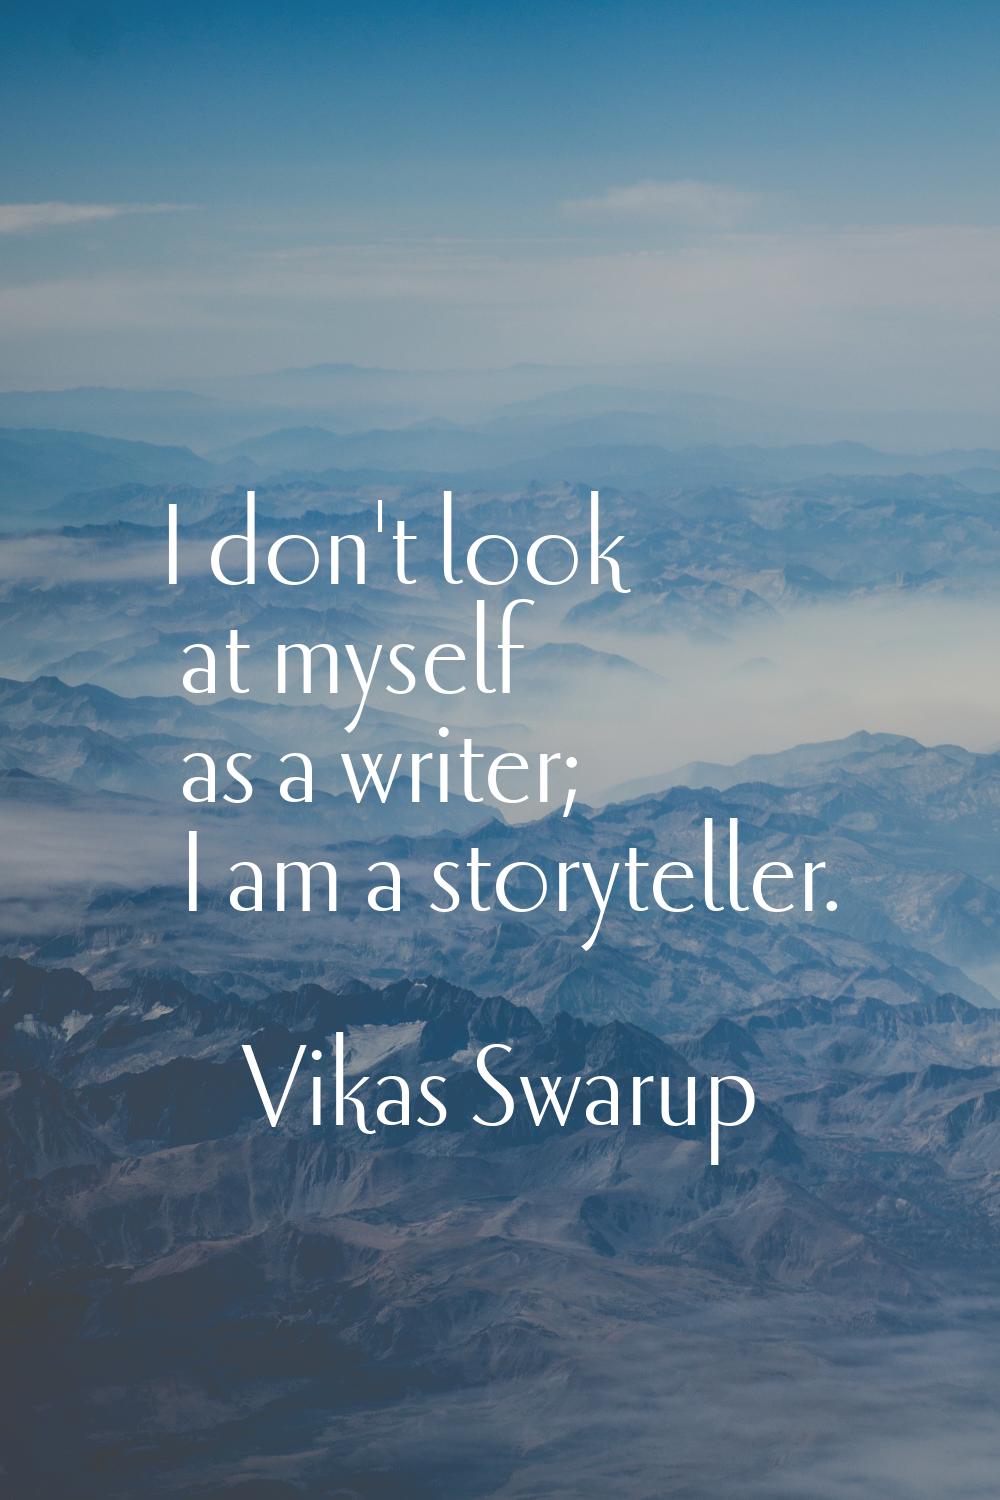 I don't look at myself as a writer; I am a storyteller.